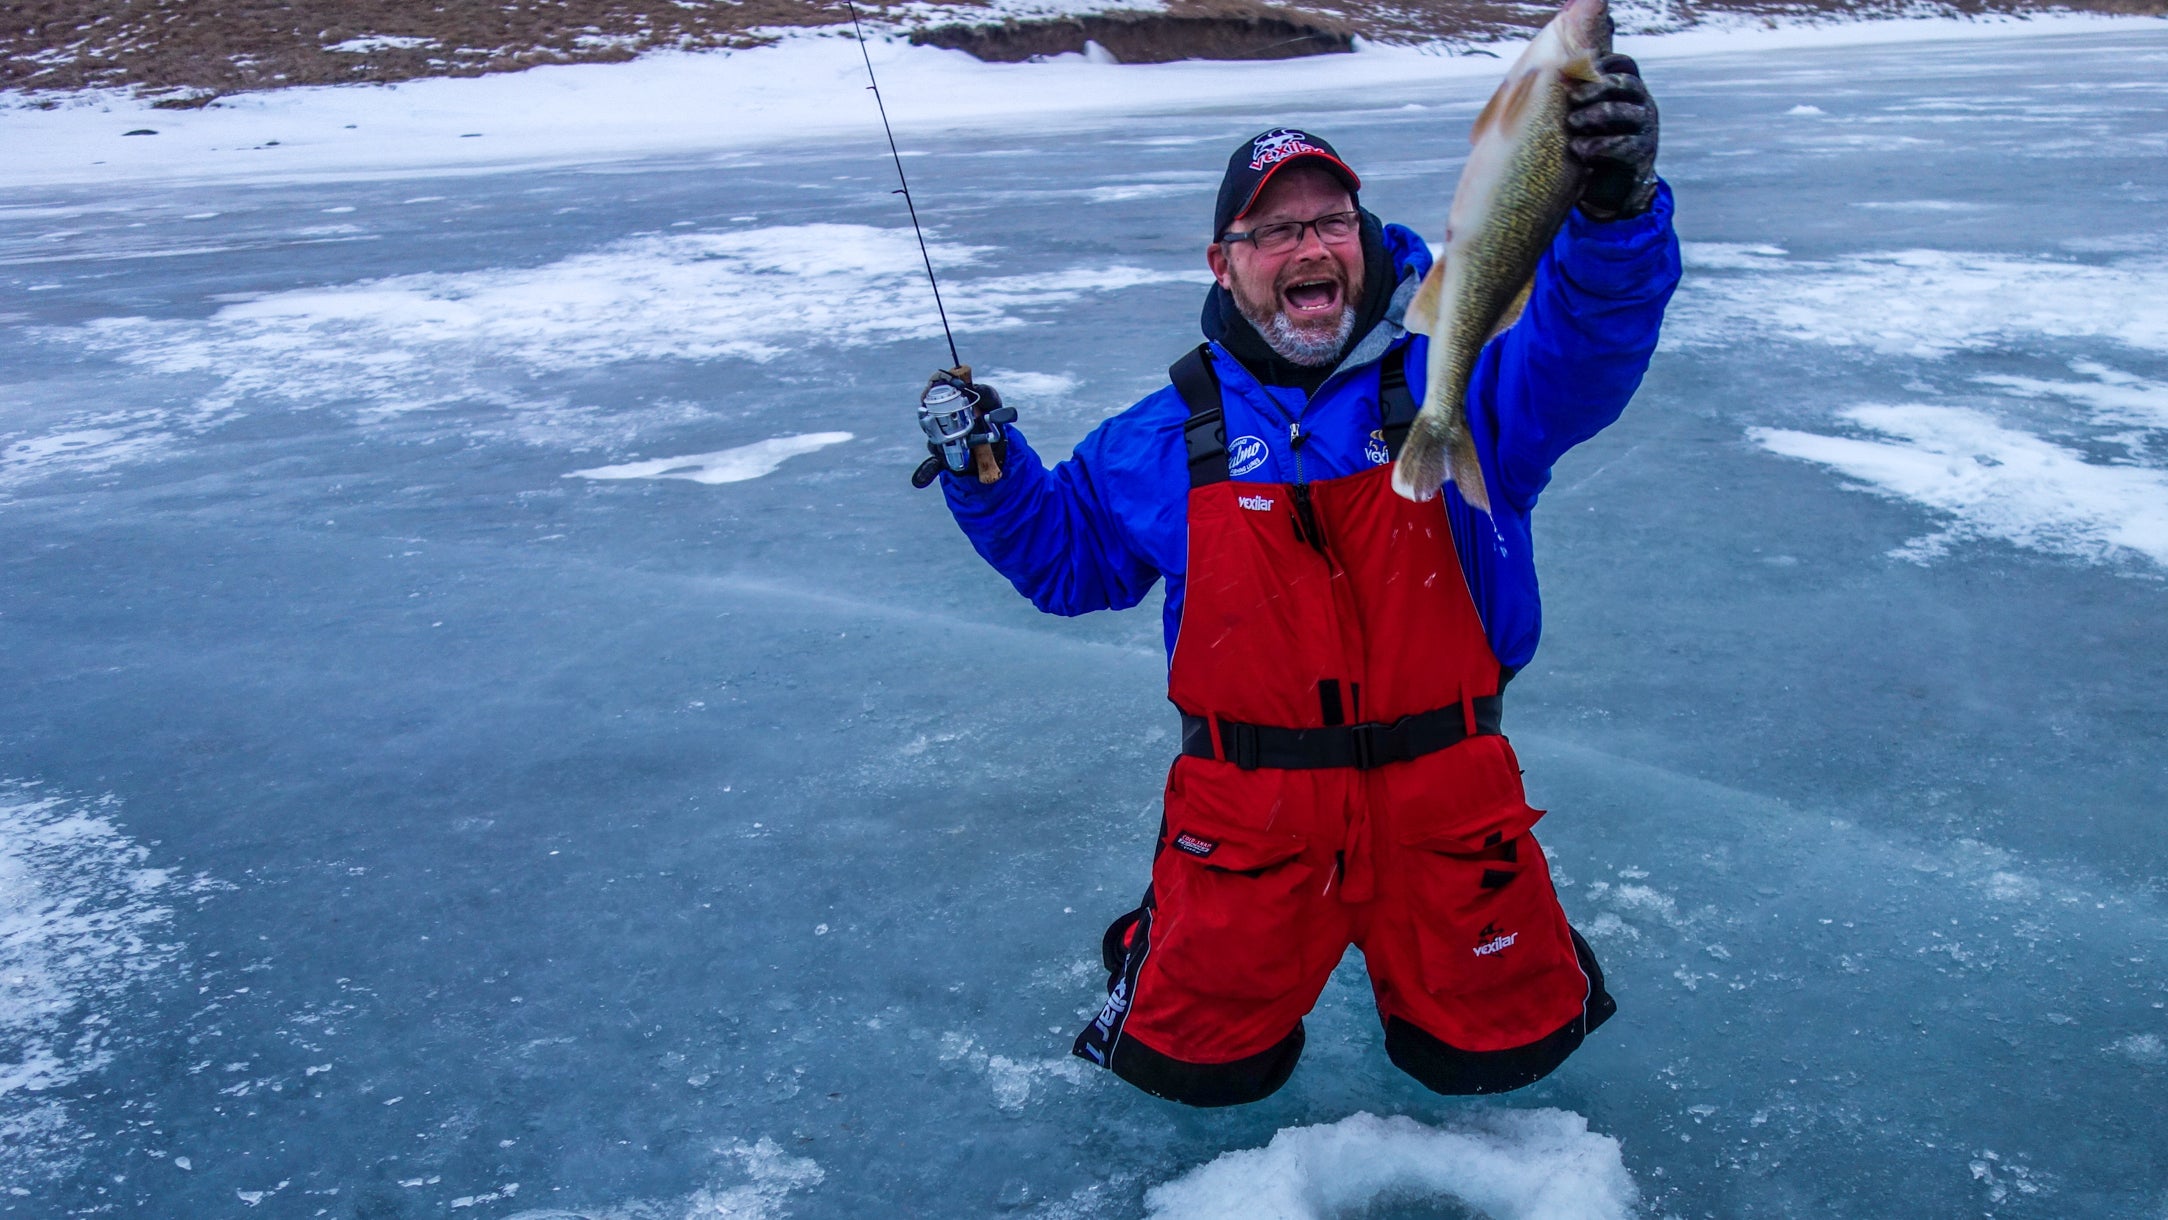 Only had my fly rod on an ice fishing trip. Didn't stop me from